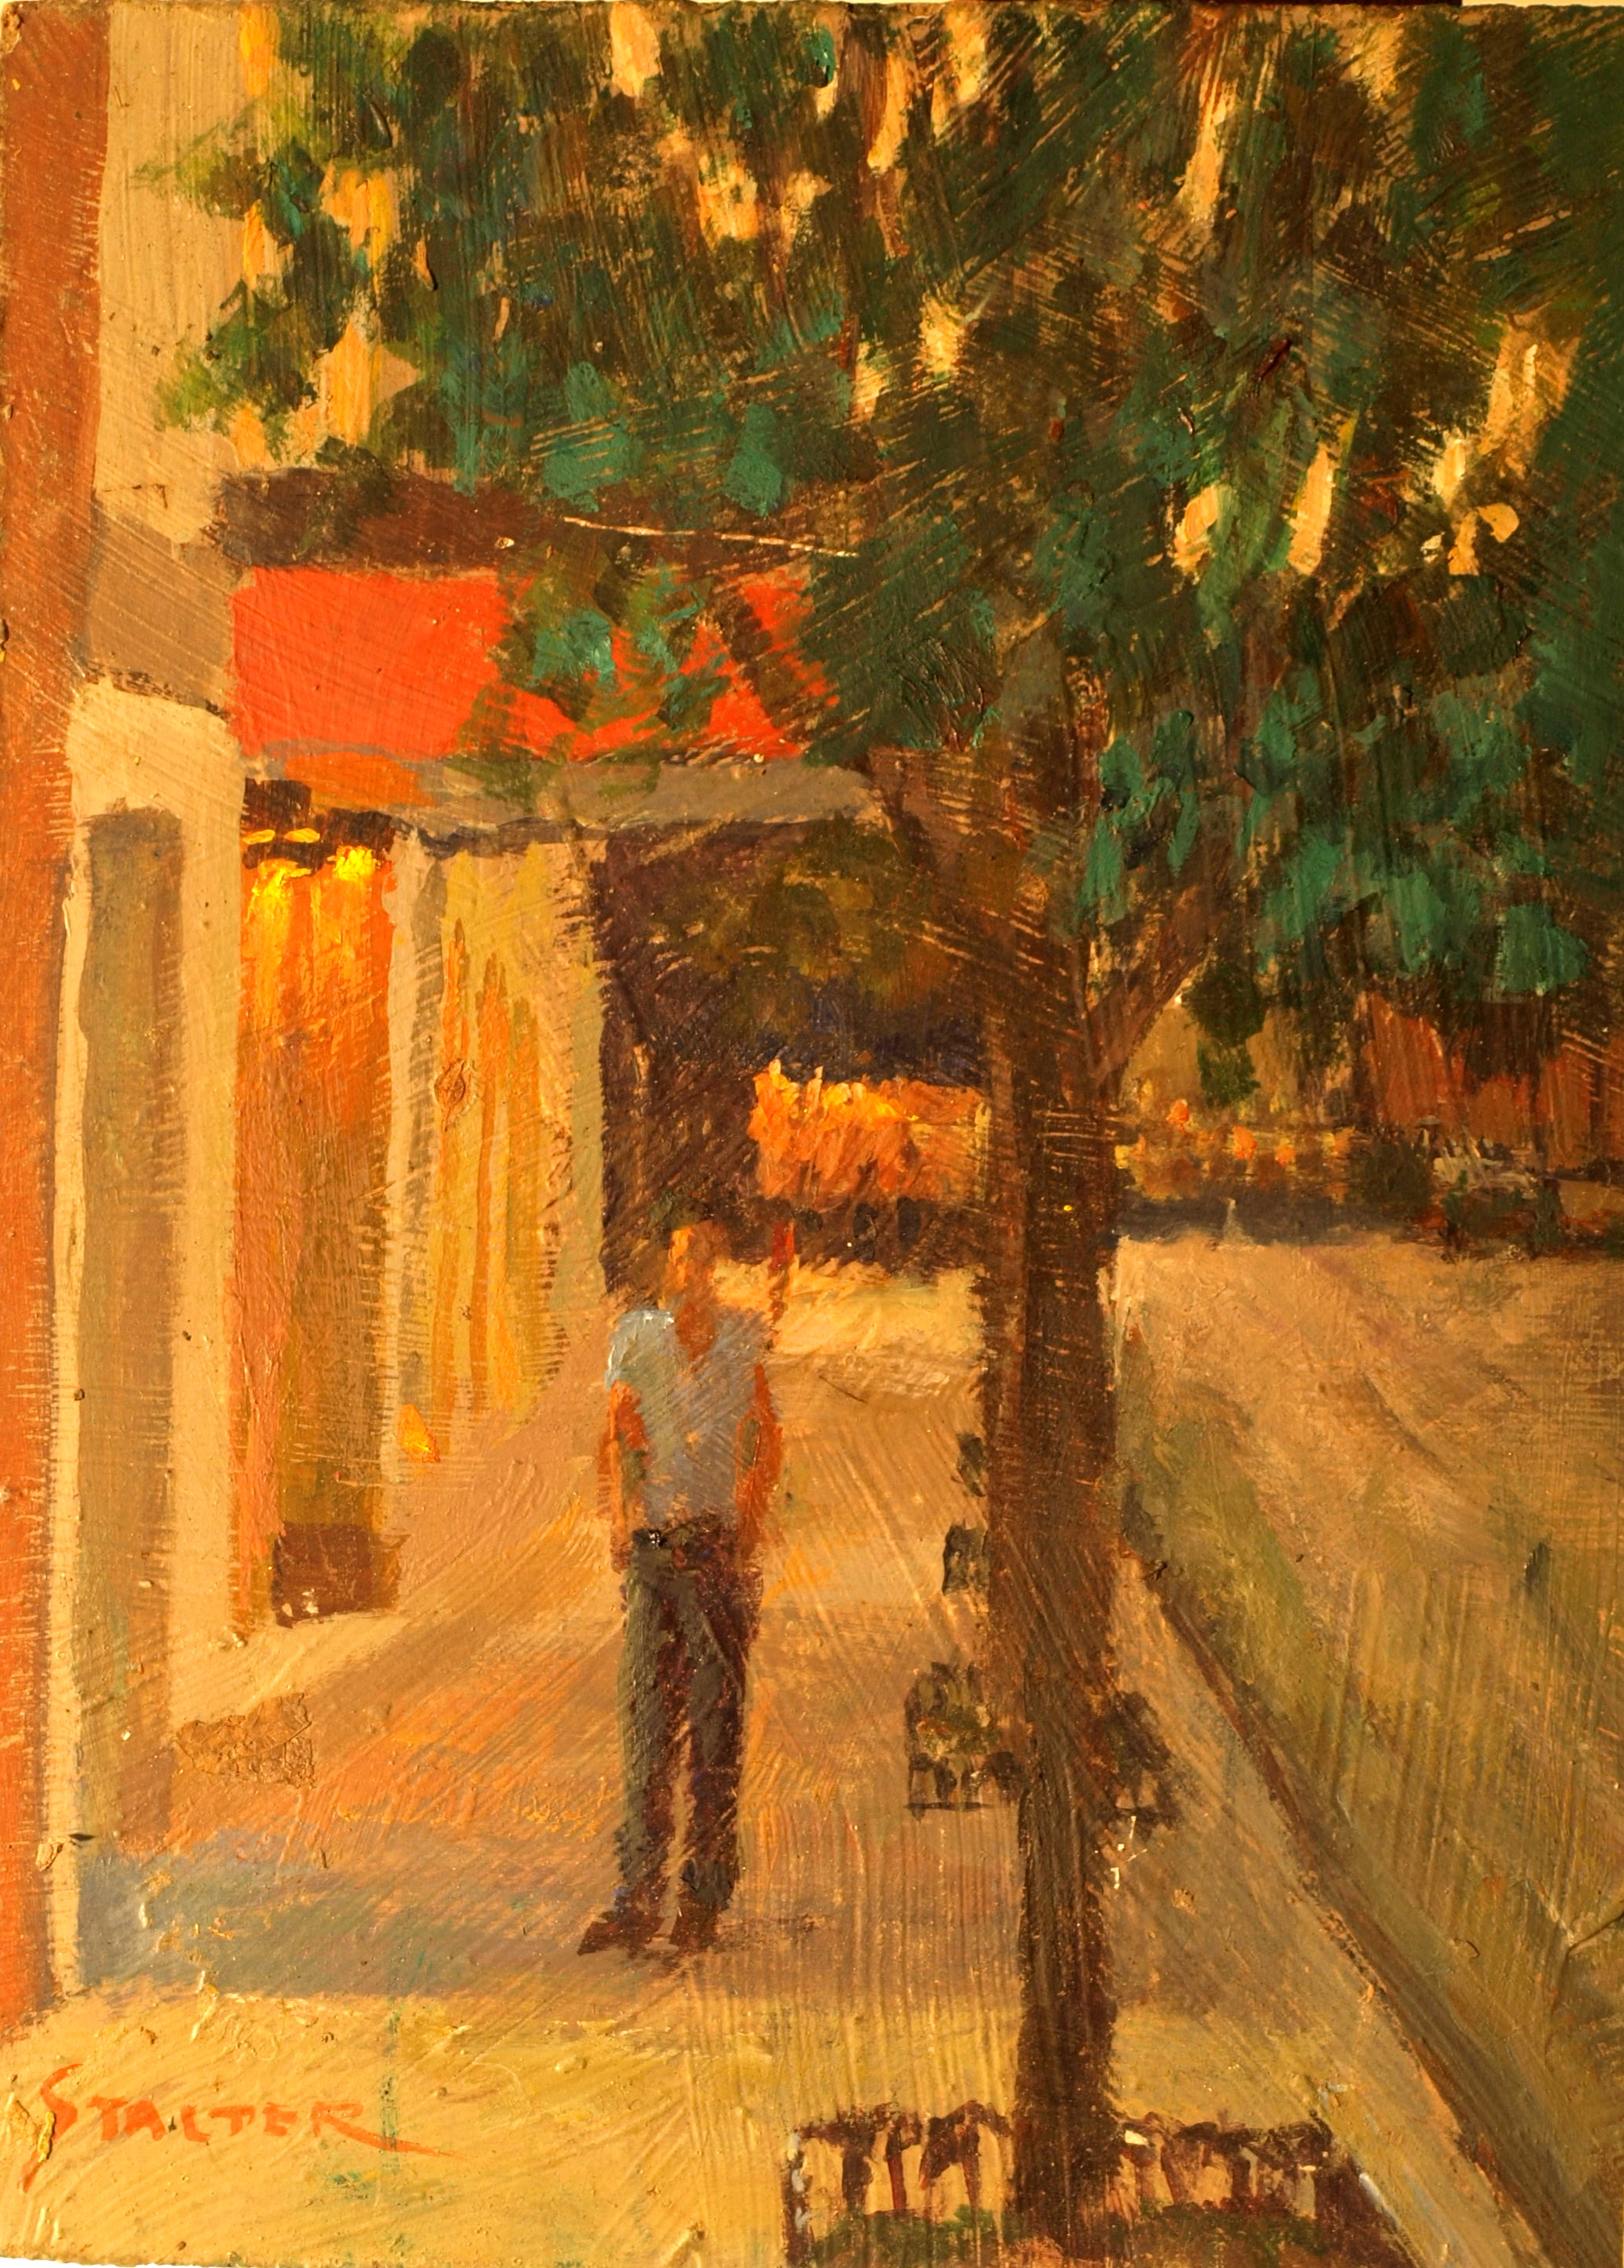 Strolling in Mystic, Oil on Canvas on Panel, 12 x 9 Inches, by Richard Stalter, $220